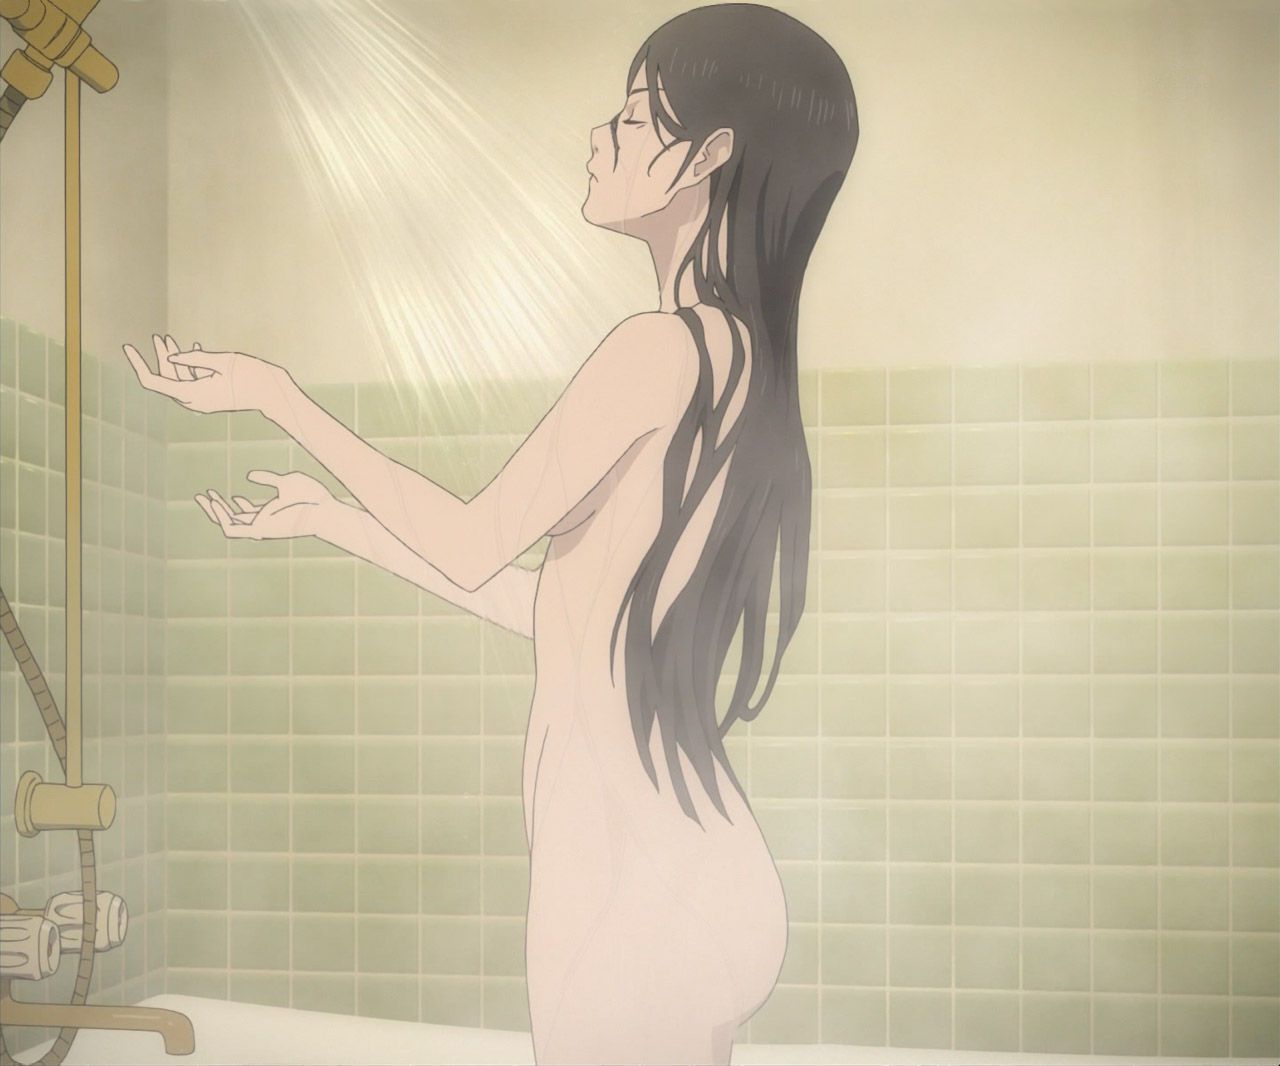 [Anime General] anime girl characters were hot springs / bath bathing siner images / [drawing revision] 22